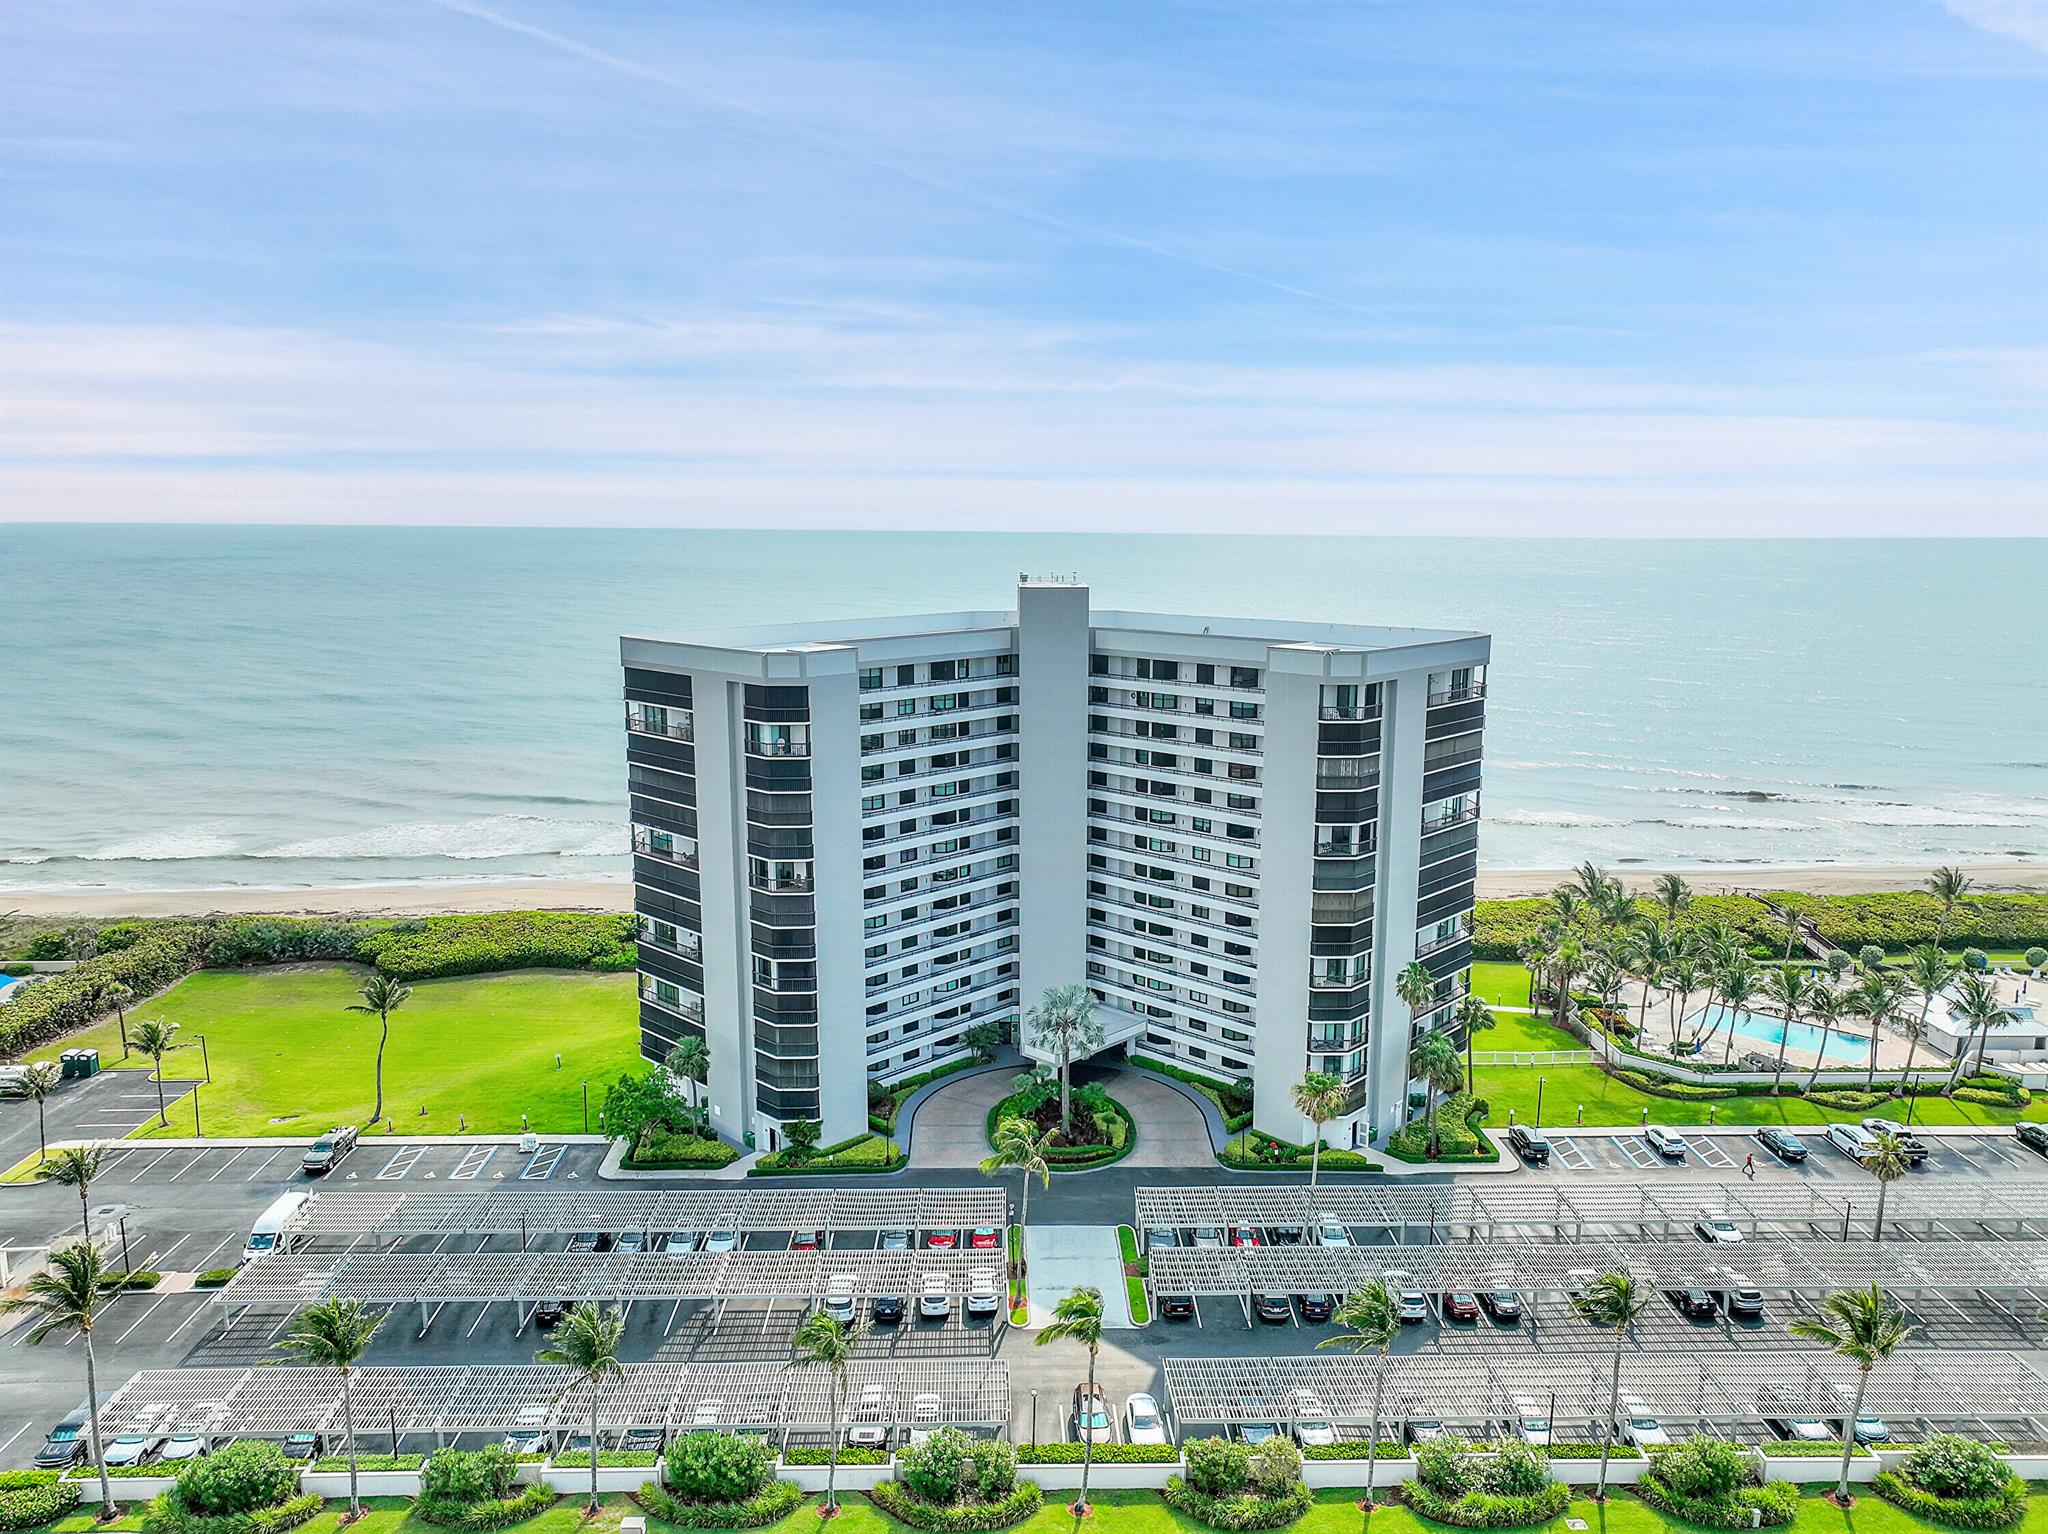 This stunning 2/2 direct oceanfront condo has been upgraded tastefully for even the pickiest buyer. Unwind and enjoy the views on your balcony of the endless ocean on the 13th floor or spend some time enjoying a cup of coffee in your breakfast nook gazing at the extensive intracoastal view! The lavish living spaces are all freshly painted and this home is boasting a myriad of upgrades that include new water heater, new AC furnace, new thermostat and a new refrigerator. Both bathrooms have been upgraded to include custom-etched glass shower enclosures, raised toilets, granite vanity countertops, new mirrors, cabinets, high-end light fixtures, faucets and sinks! The kitchen is adorned with new light fixtures, granite kitchen counters and kitchen island. You can also take comfort in knowing the home is protected with all new hurricane shutters facing the ocean. The entire building has already had the concrete restoration completed and an extensive remodel of all the common areas, pool deck, elevators and new roof with NO new assessments being passed on to the new owner. The amenities are endless with dual pools, spa, dog park, beach access and golf that is available at no additional membership fee. Monthly HOA fee includes cable, internet, water, sewer, trash and exterior building maintenance and insurance keeping additional monthly costs extremely low. As if that wasn't enough, the furniture is negotiable making the move-in process as easy as packing your clothes and toothbrush! Don't miss the opportunity to own this impeccable oasis and enjoy the beachfront lifestyle!